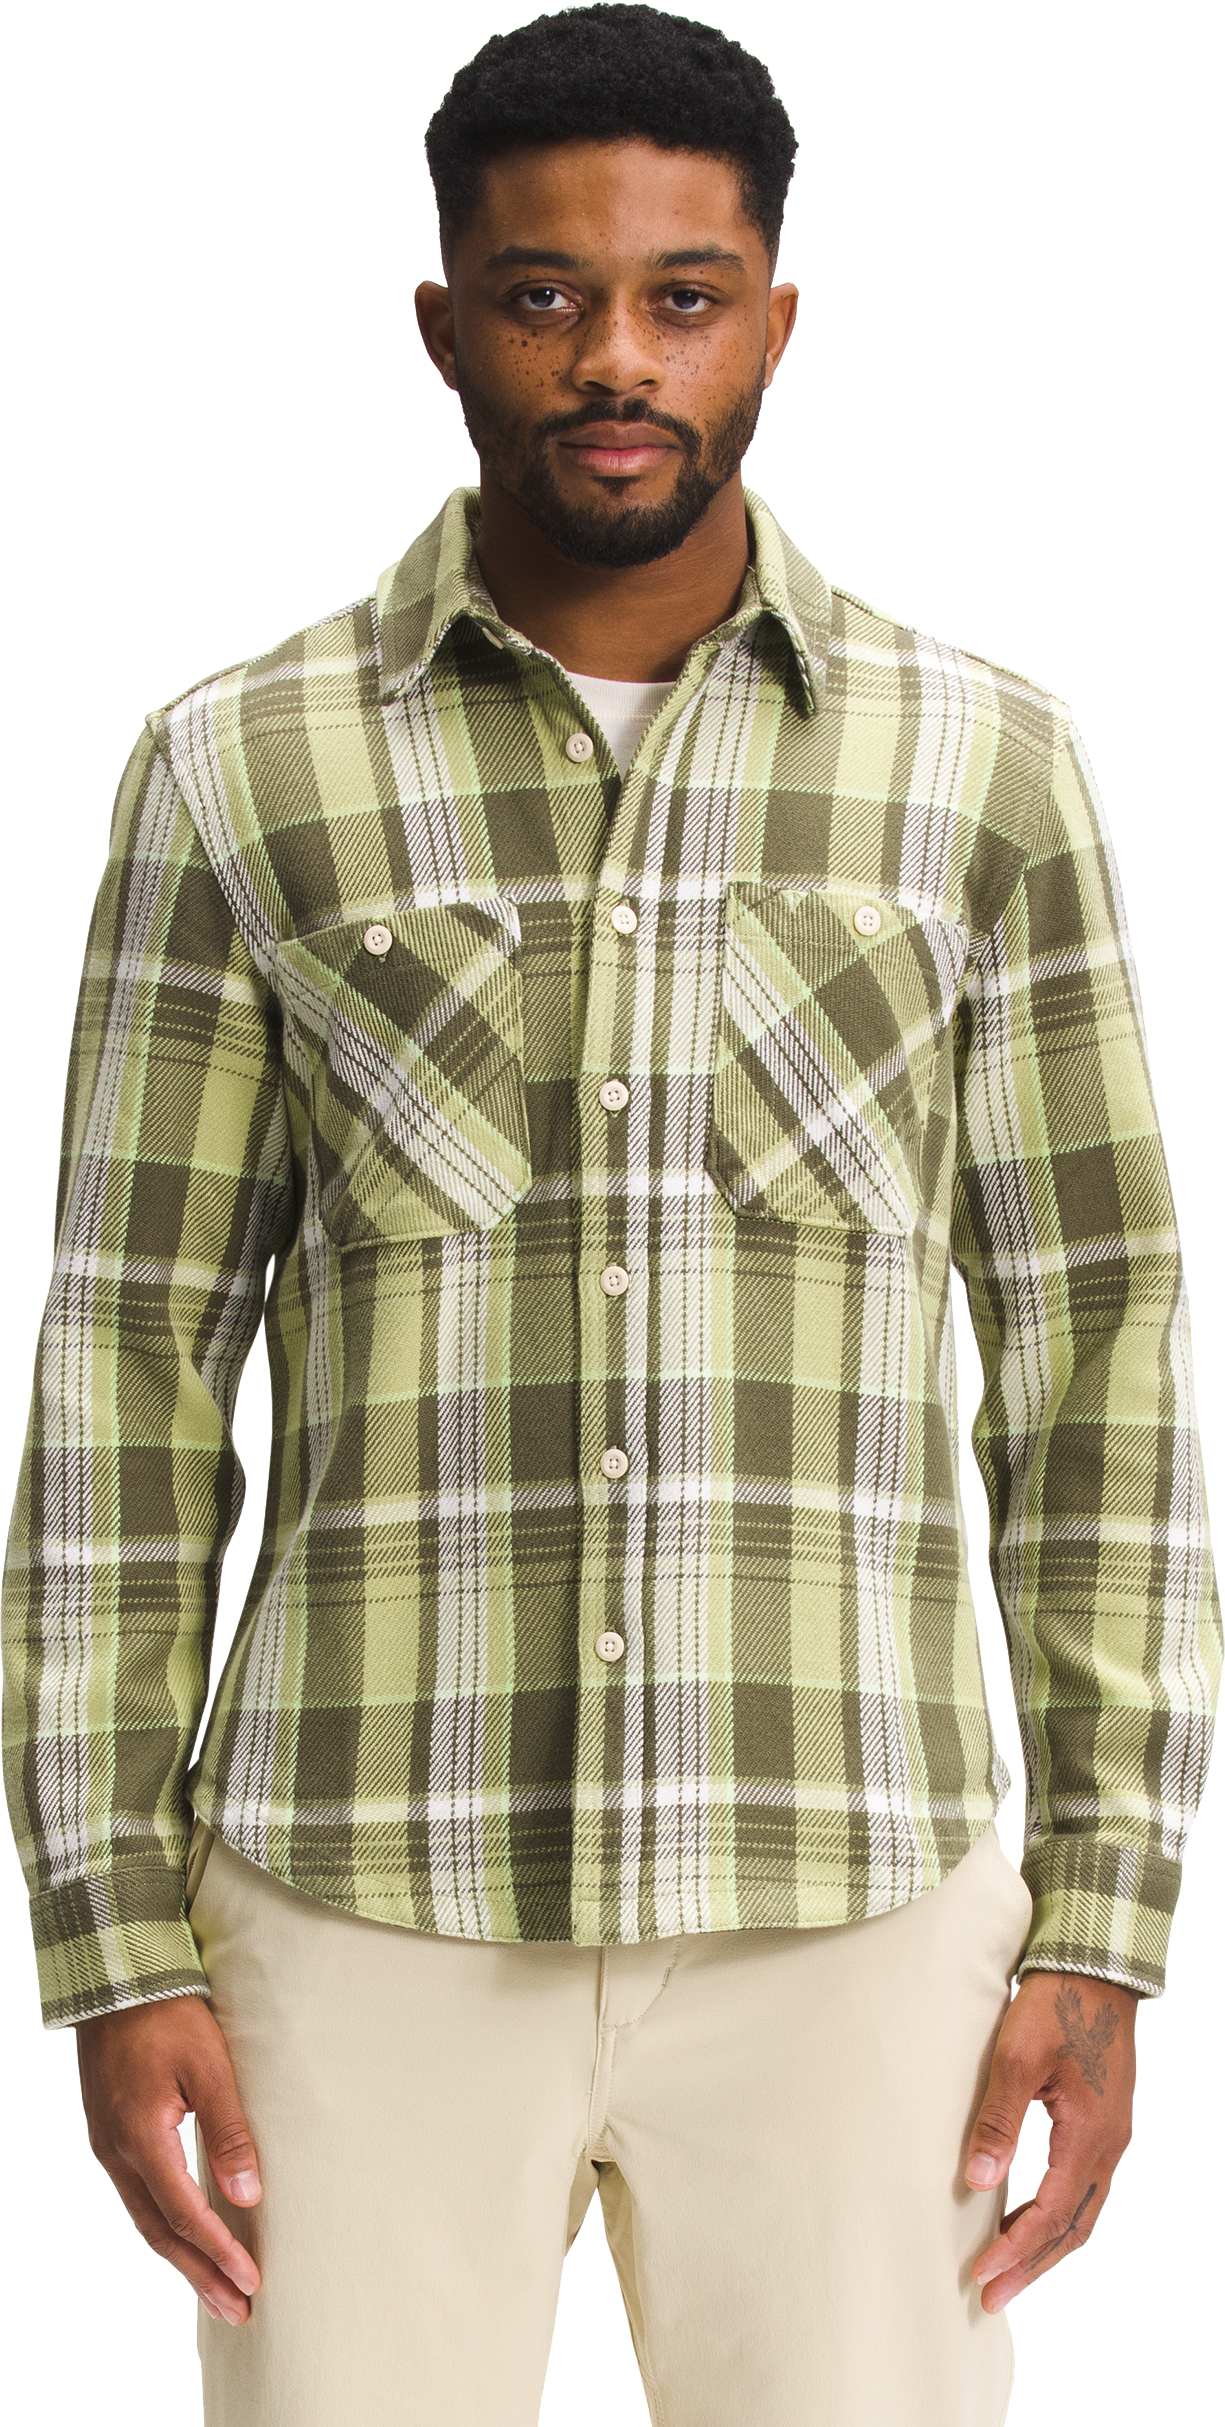 The North Face Valley Twill Flannel Long-Sleeve Shirt for Men - Goblin Blue Large HD Plaid - 2XL